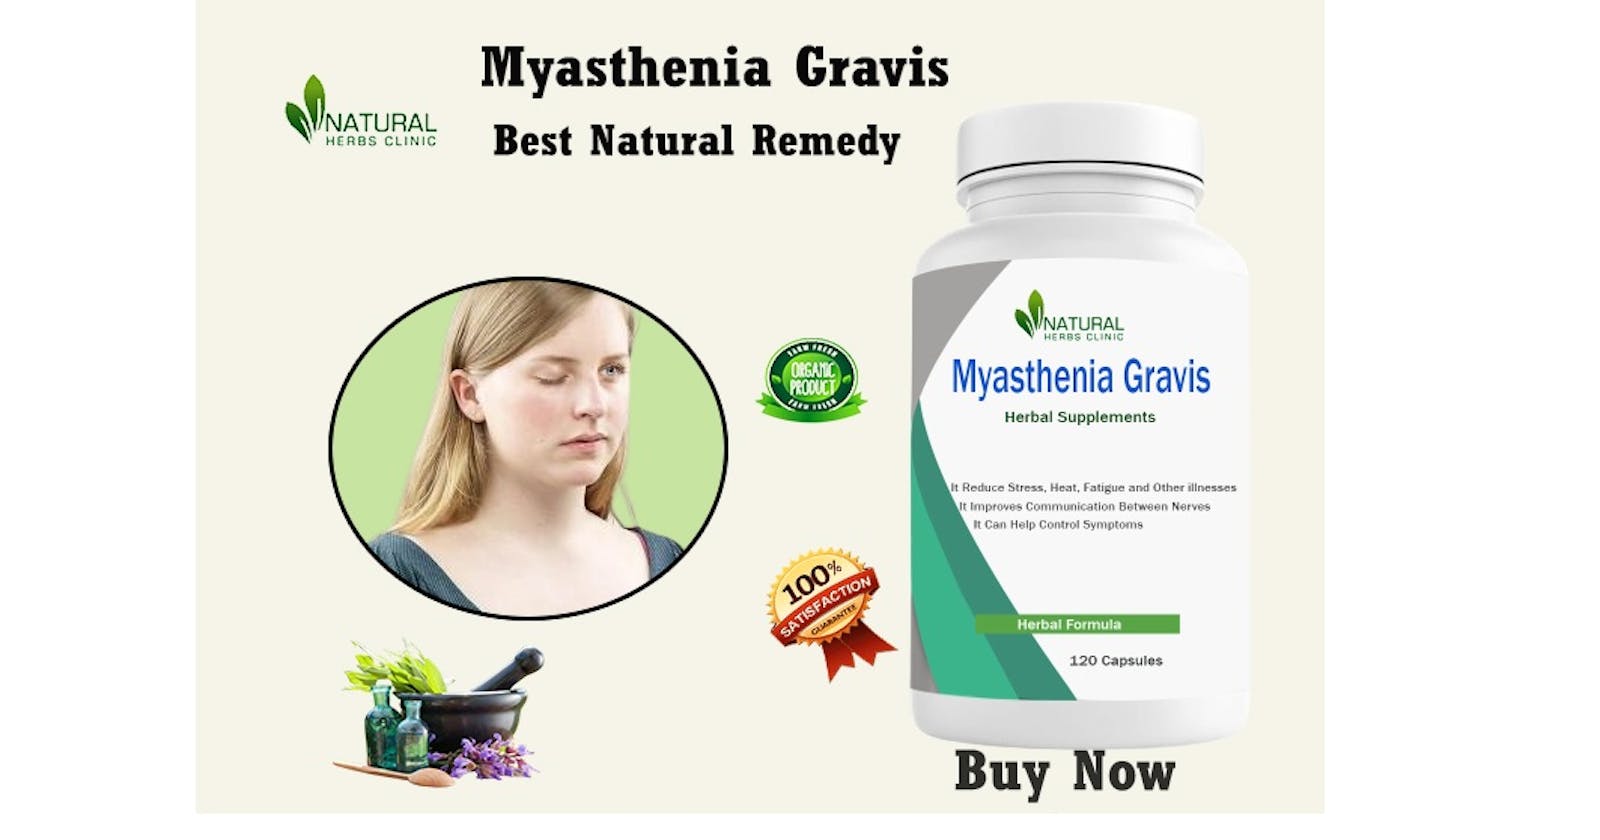 Myasthenia Gravis: Utilize Home Remedies as Natural Solution for the Disease